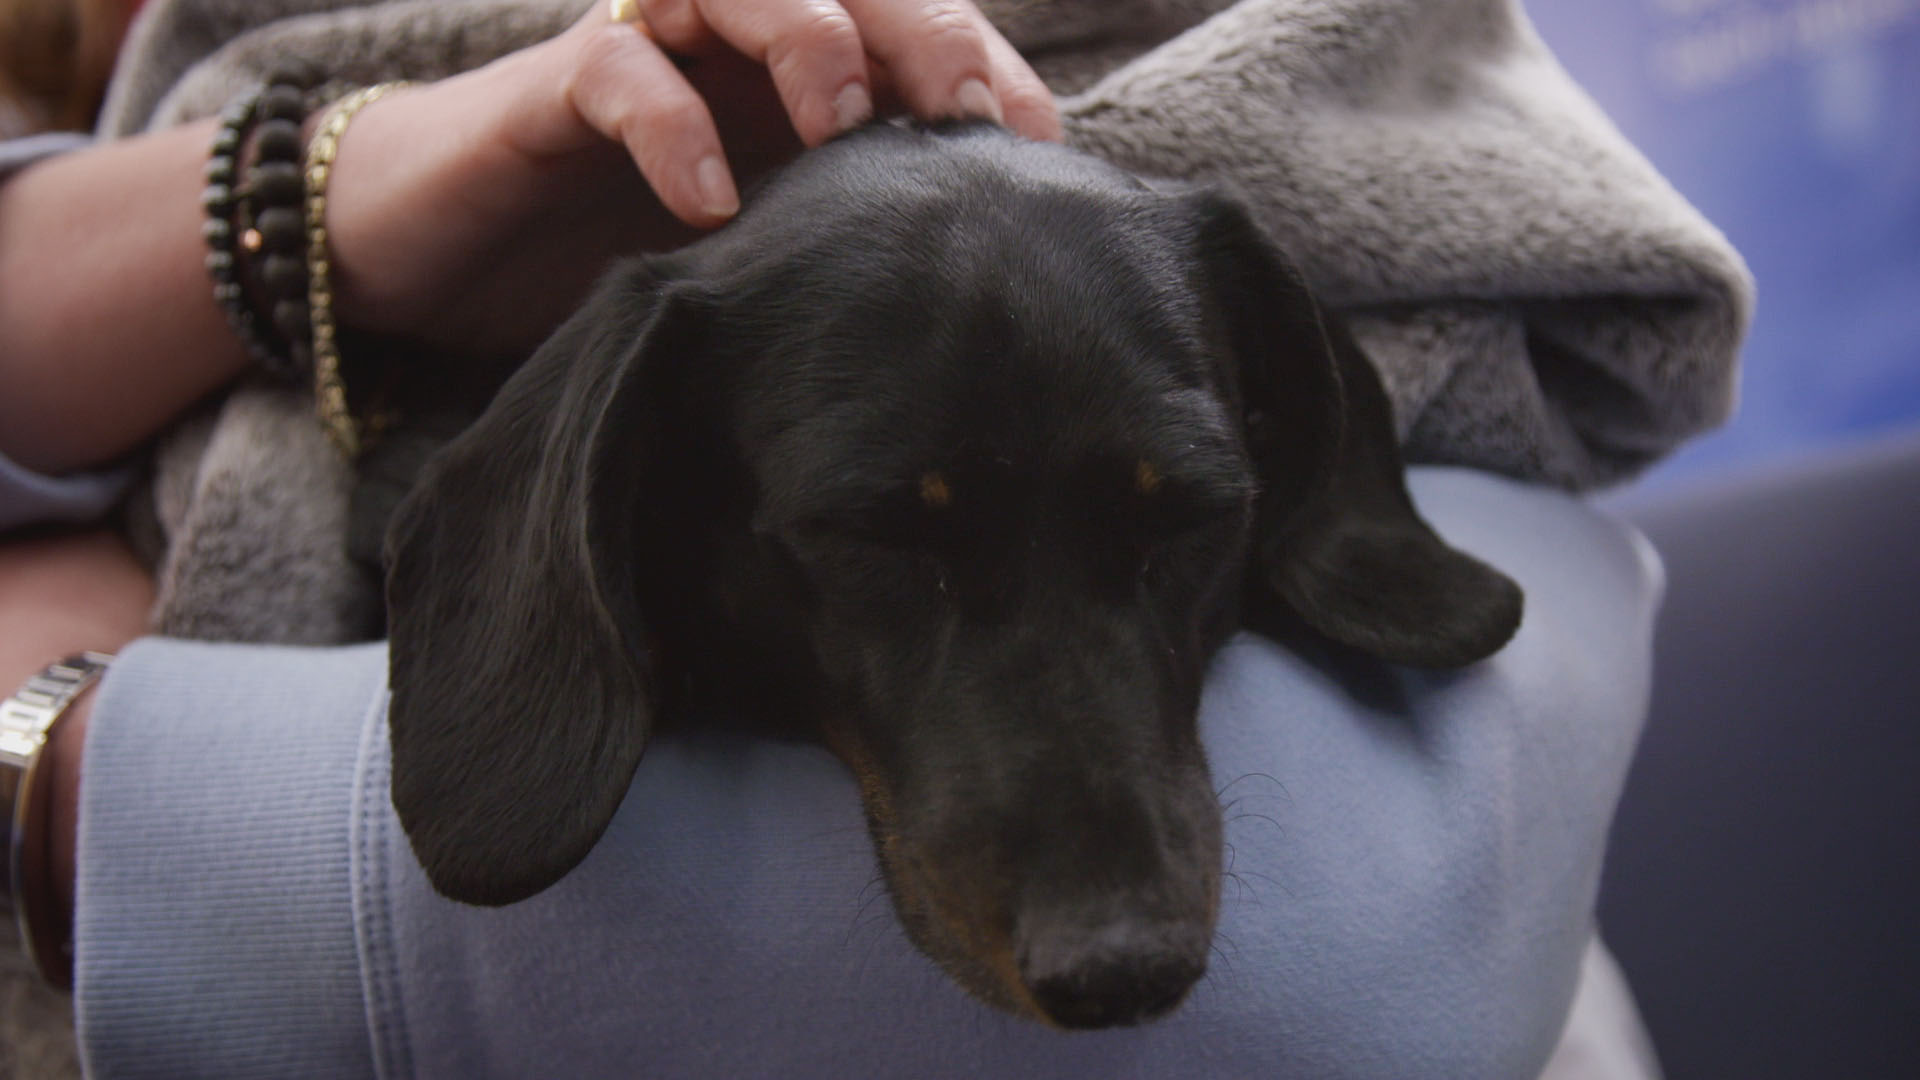 5 year old Dachshund patient on The Supervet